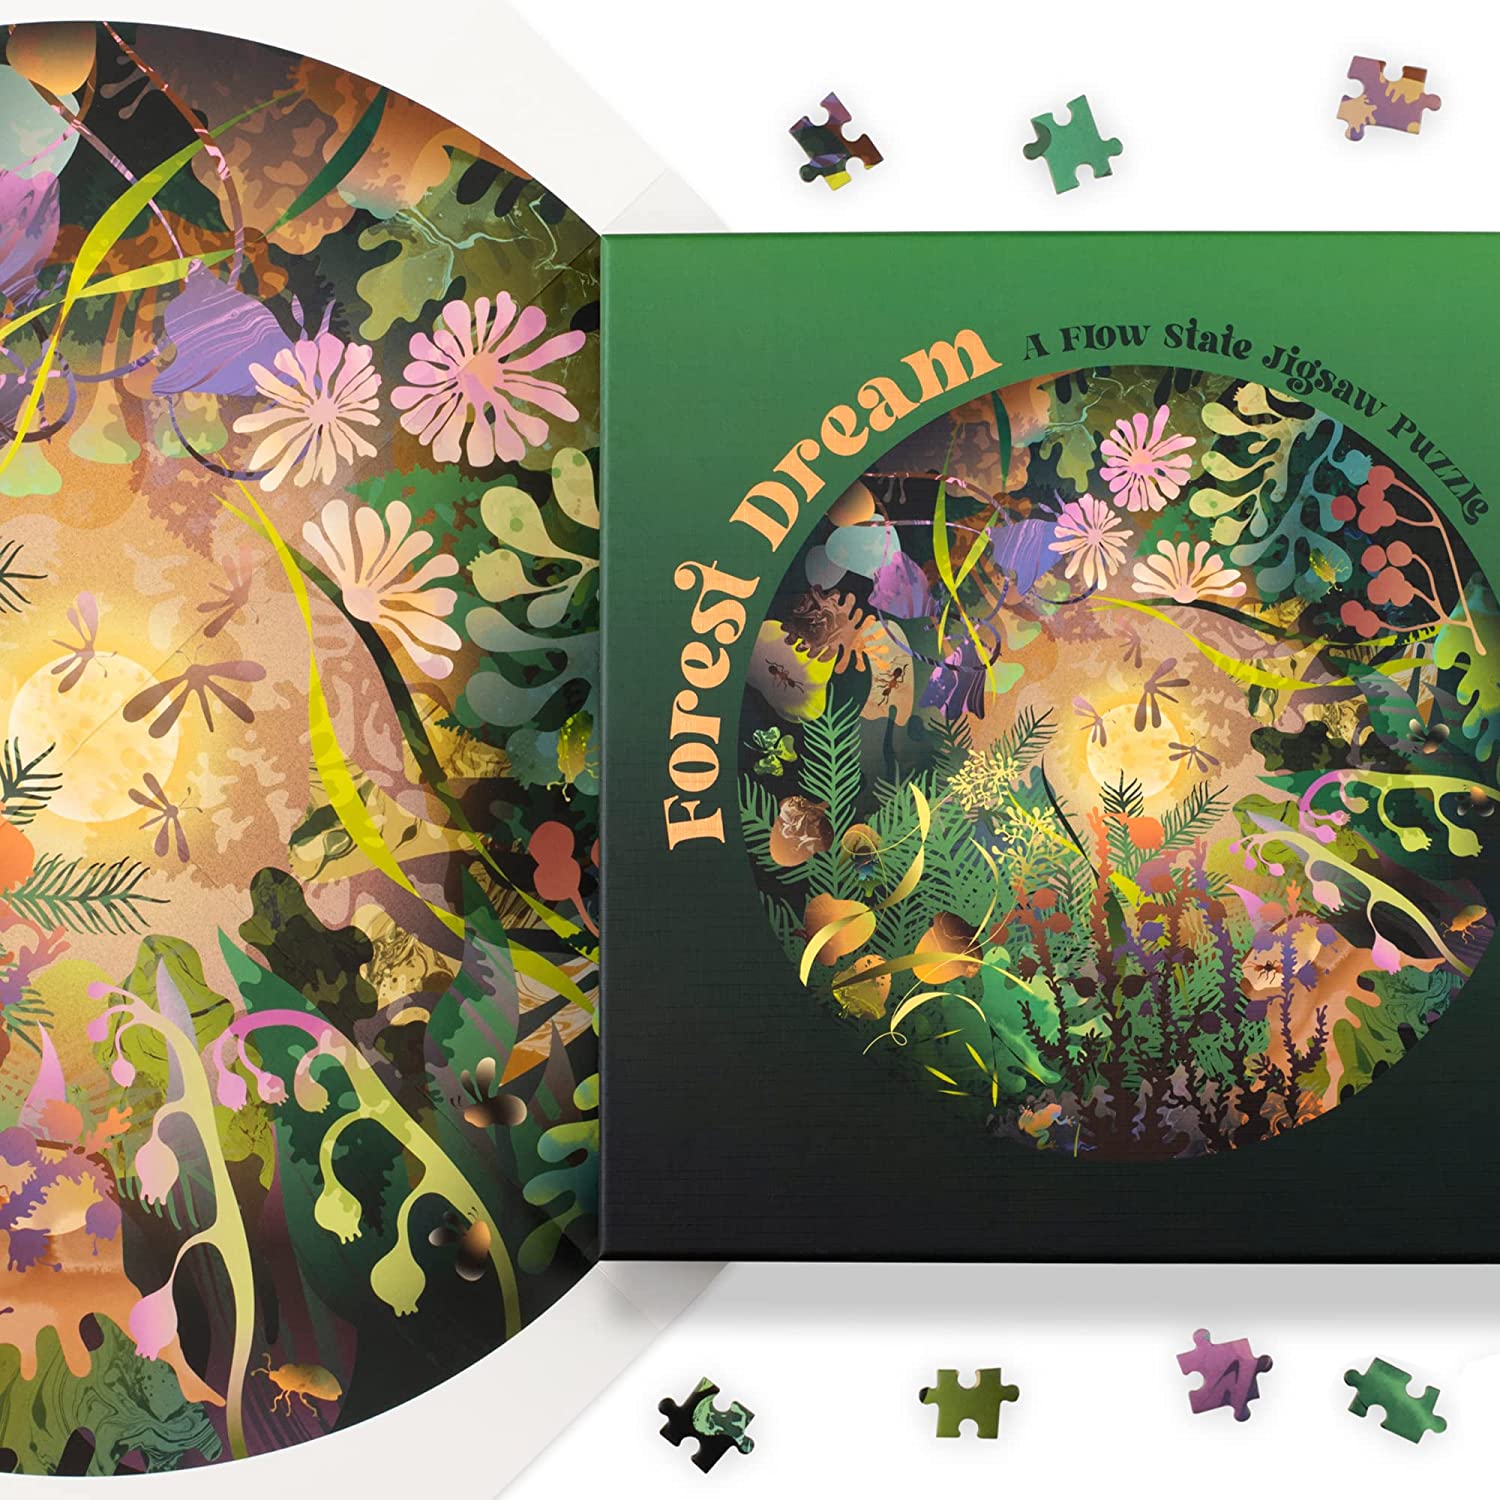 Forest Dream: A Flow Jigsaw Puzzle